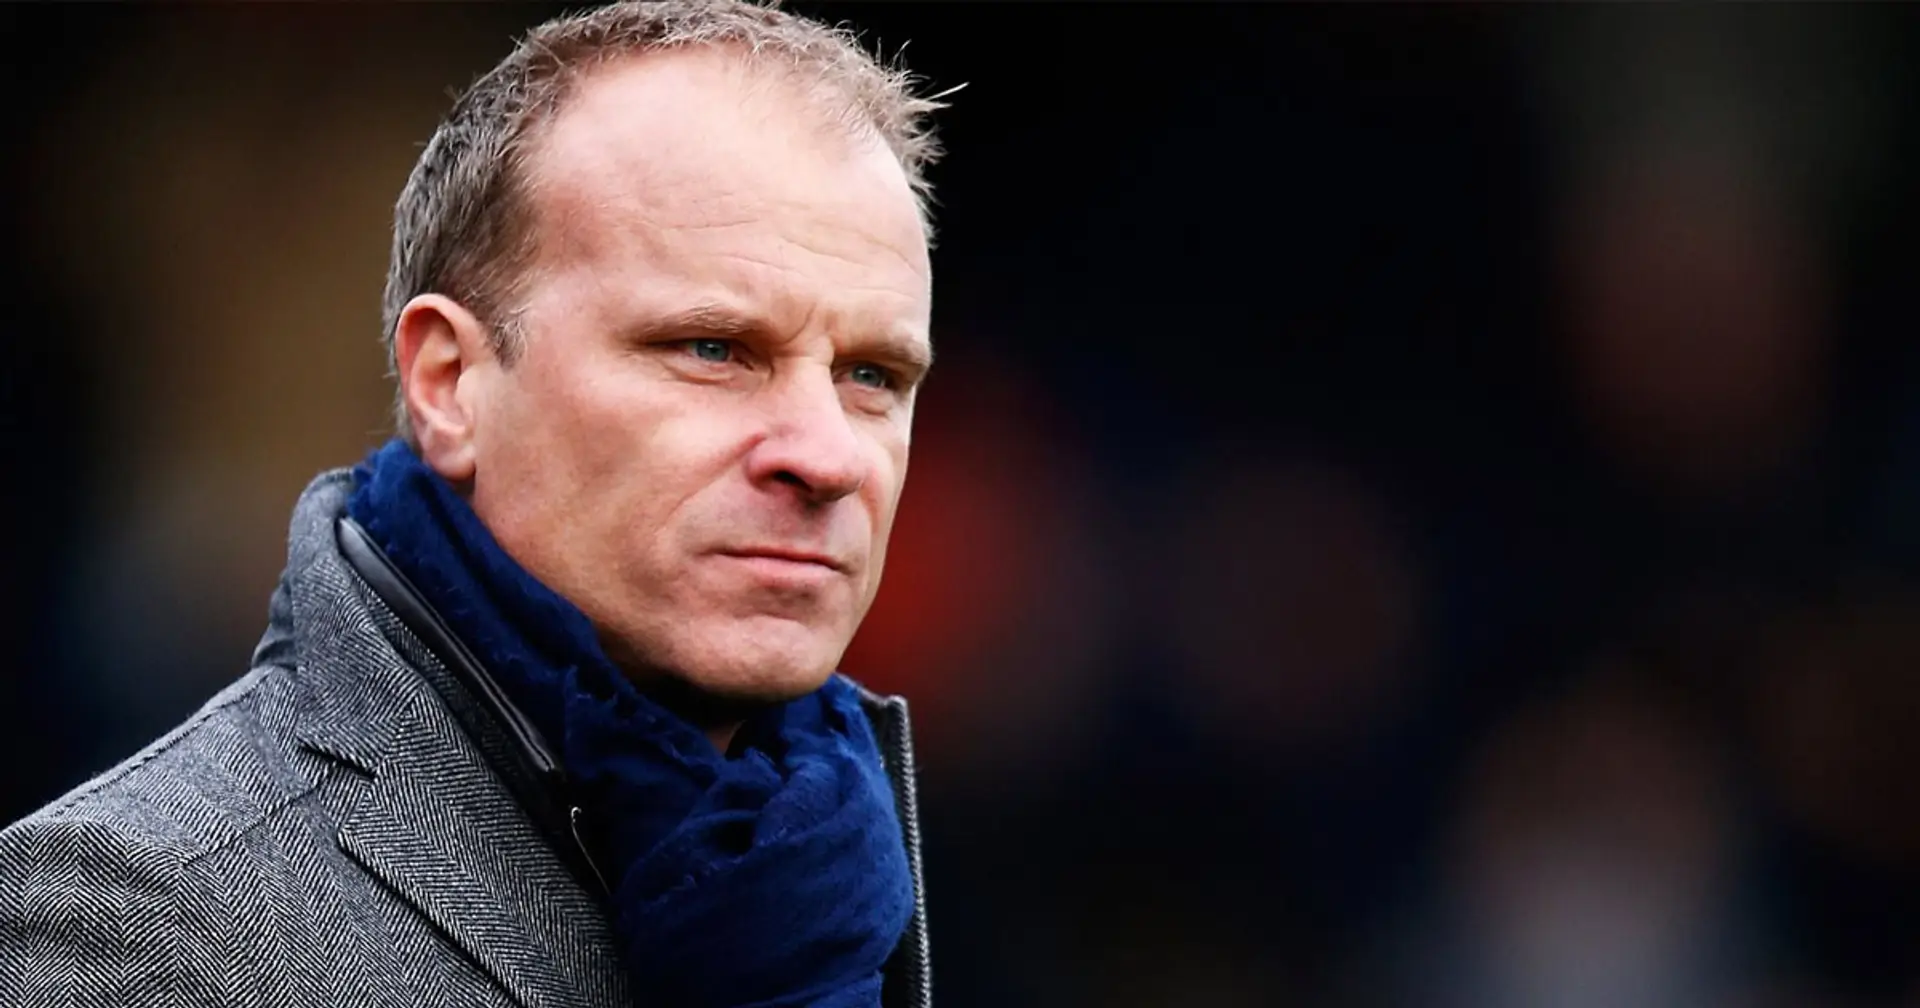 Bergkamp 'heads consortium' of other Dutch stars interested in buying English club